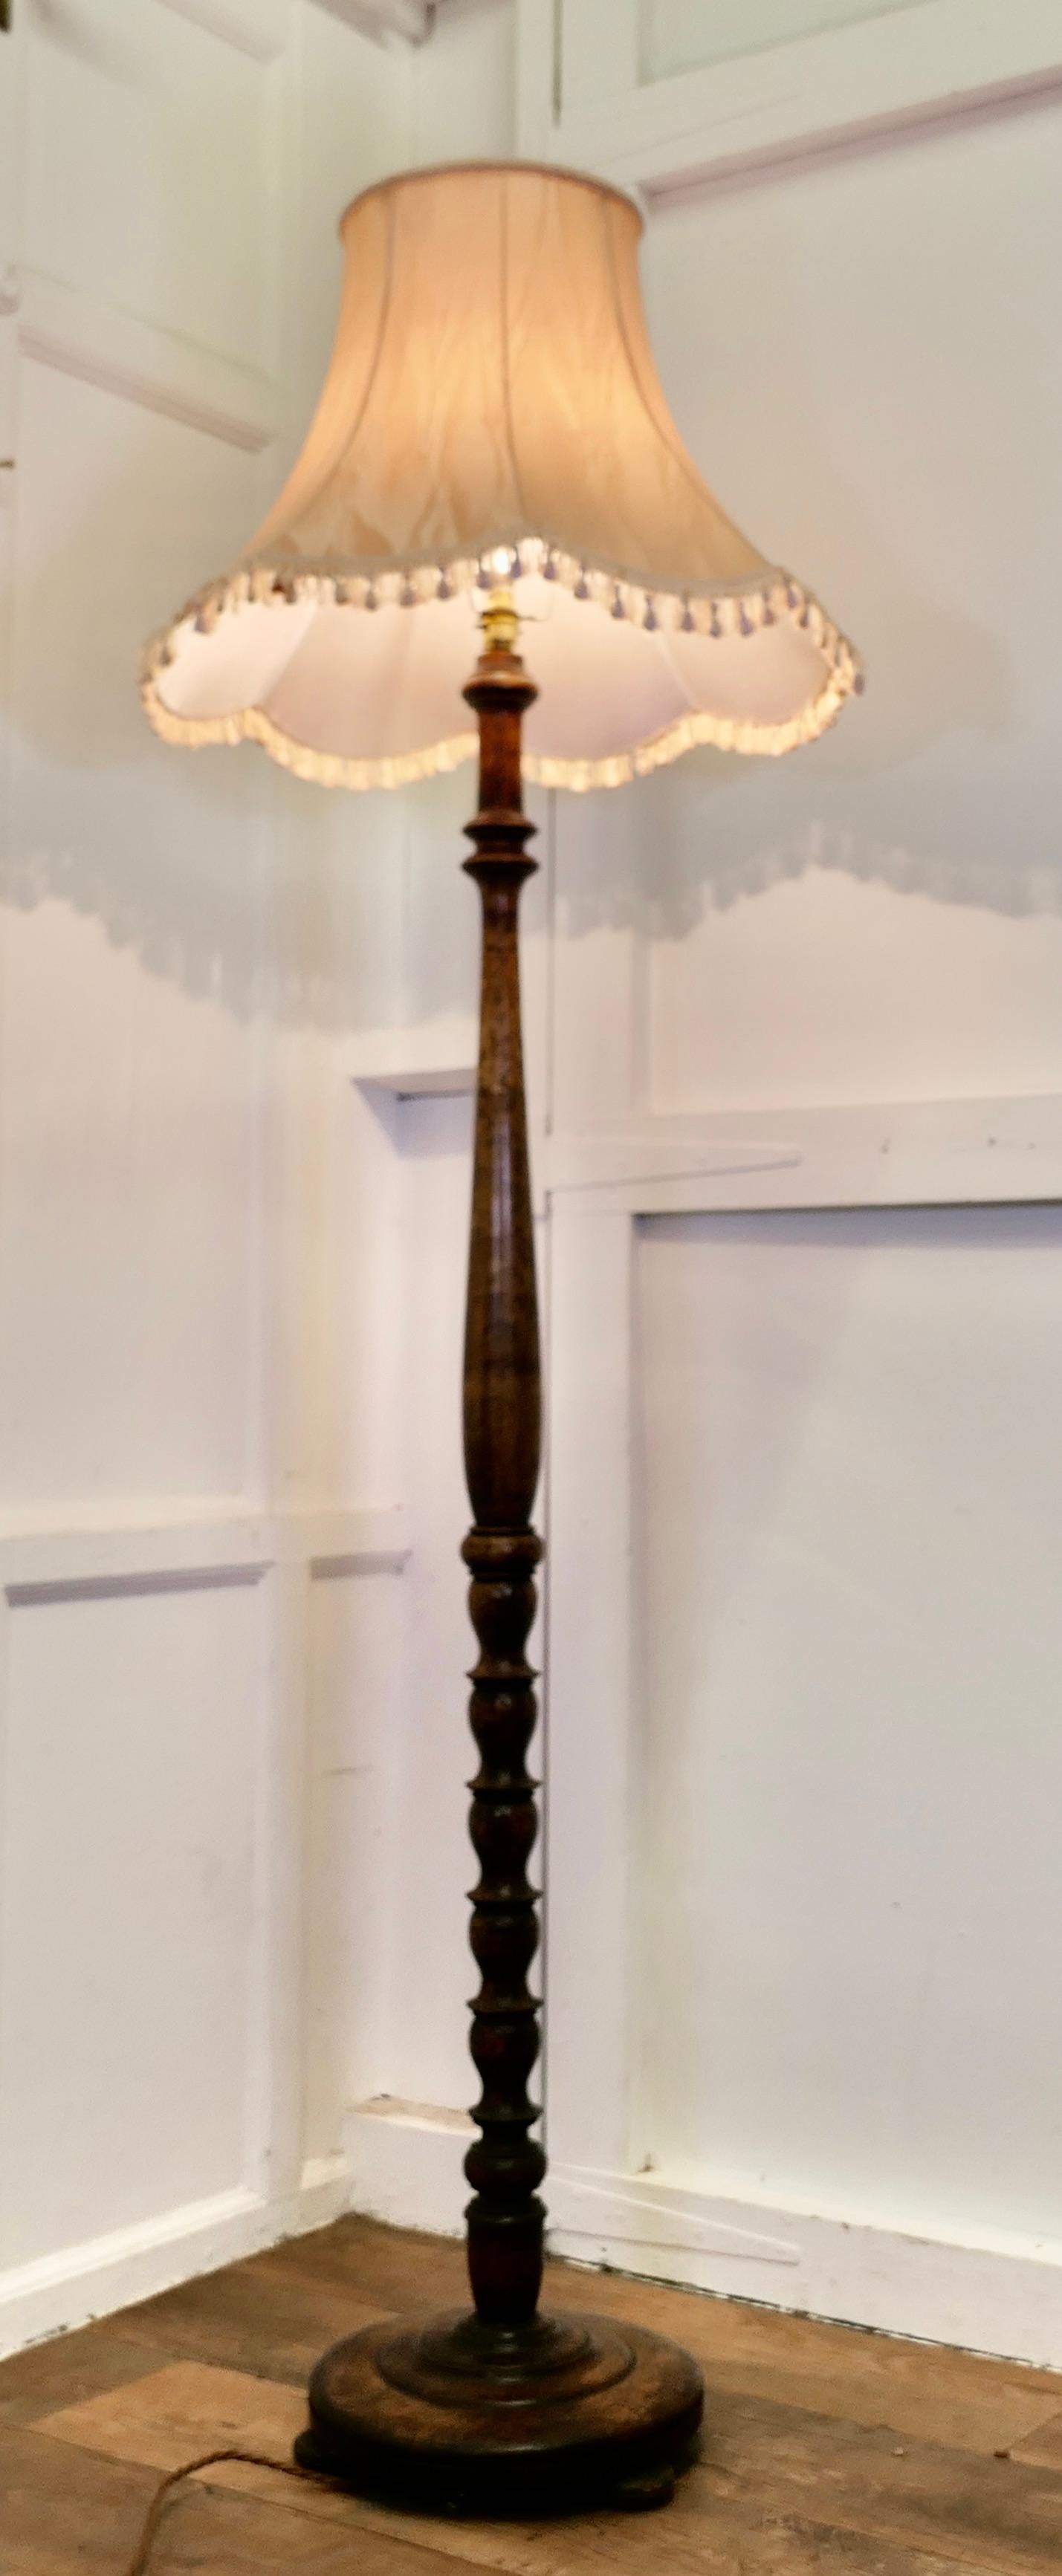 Early 20th Century Art Deco Odeon Style Turned Burr Walnut Standard or Floor Lamp   This is a very  For Sale